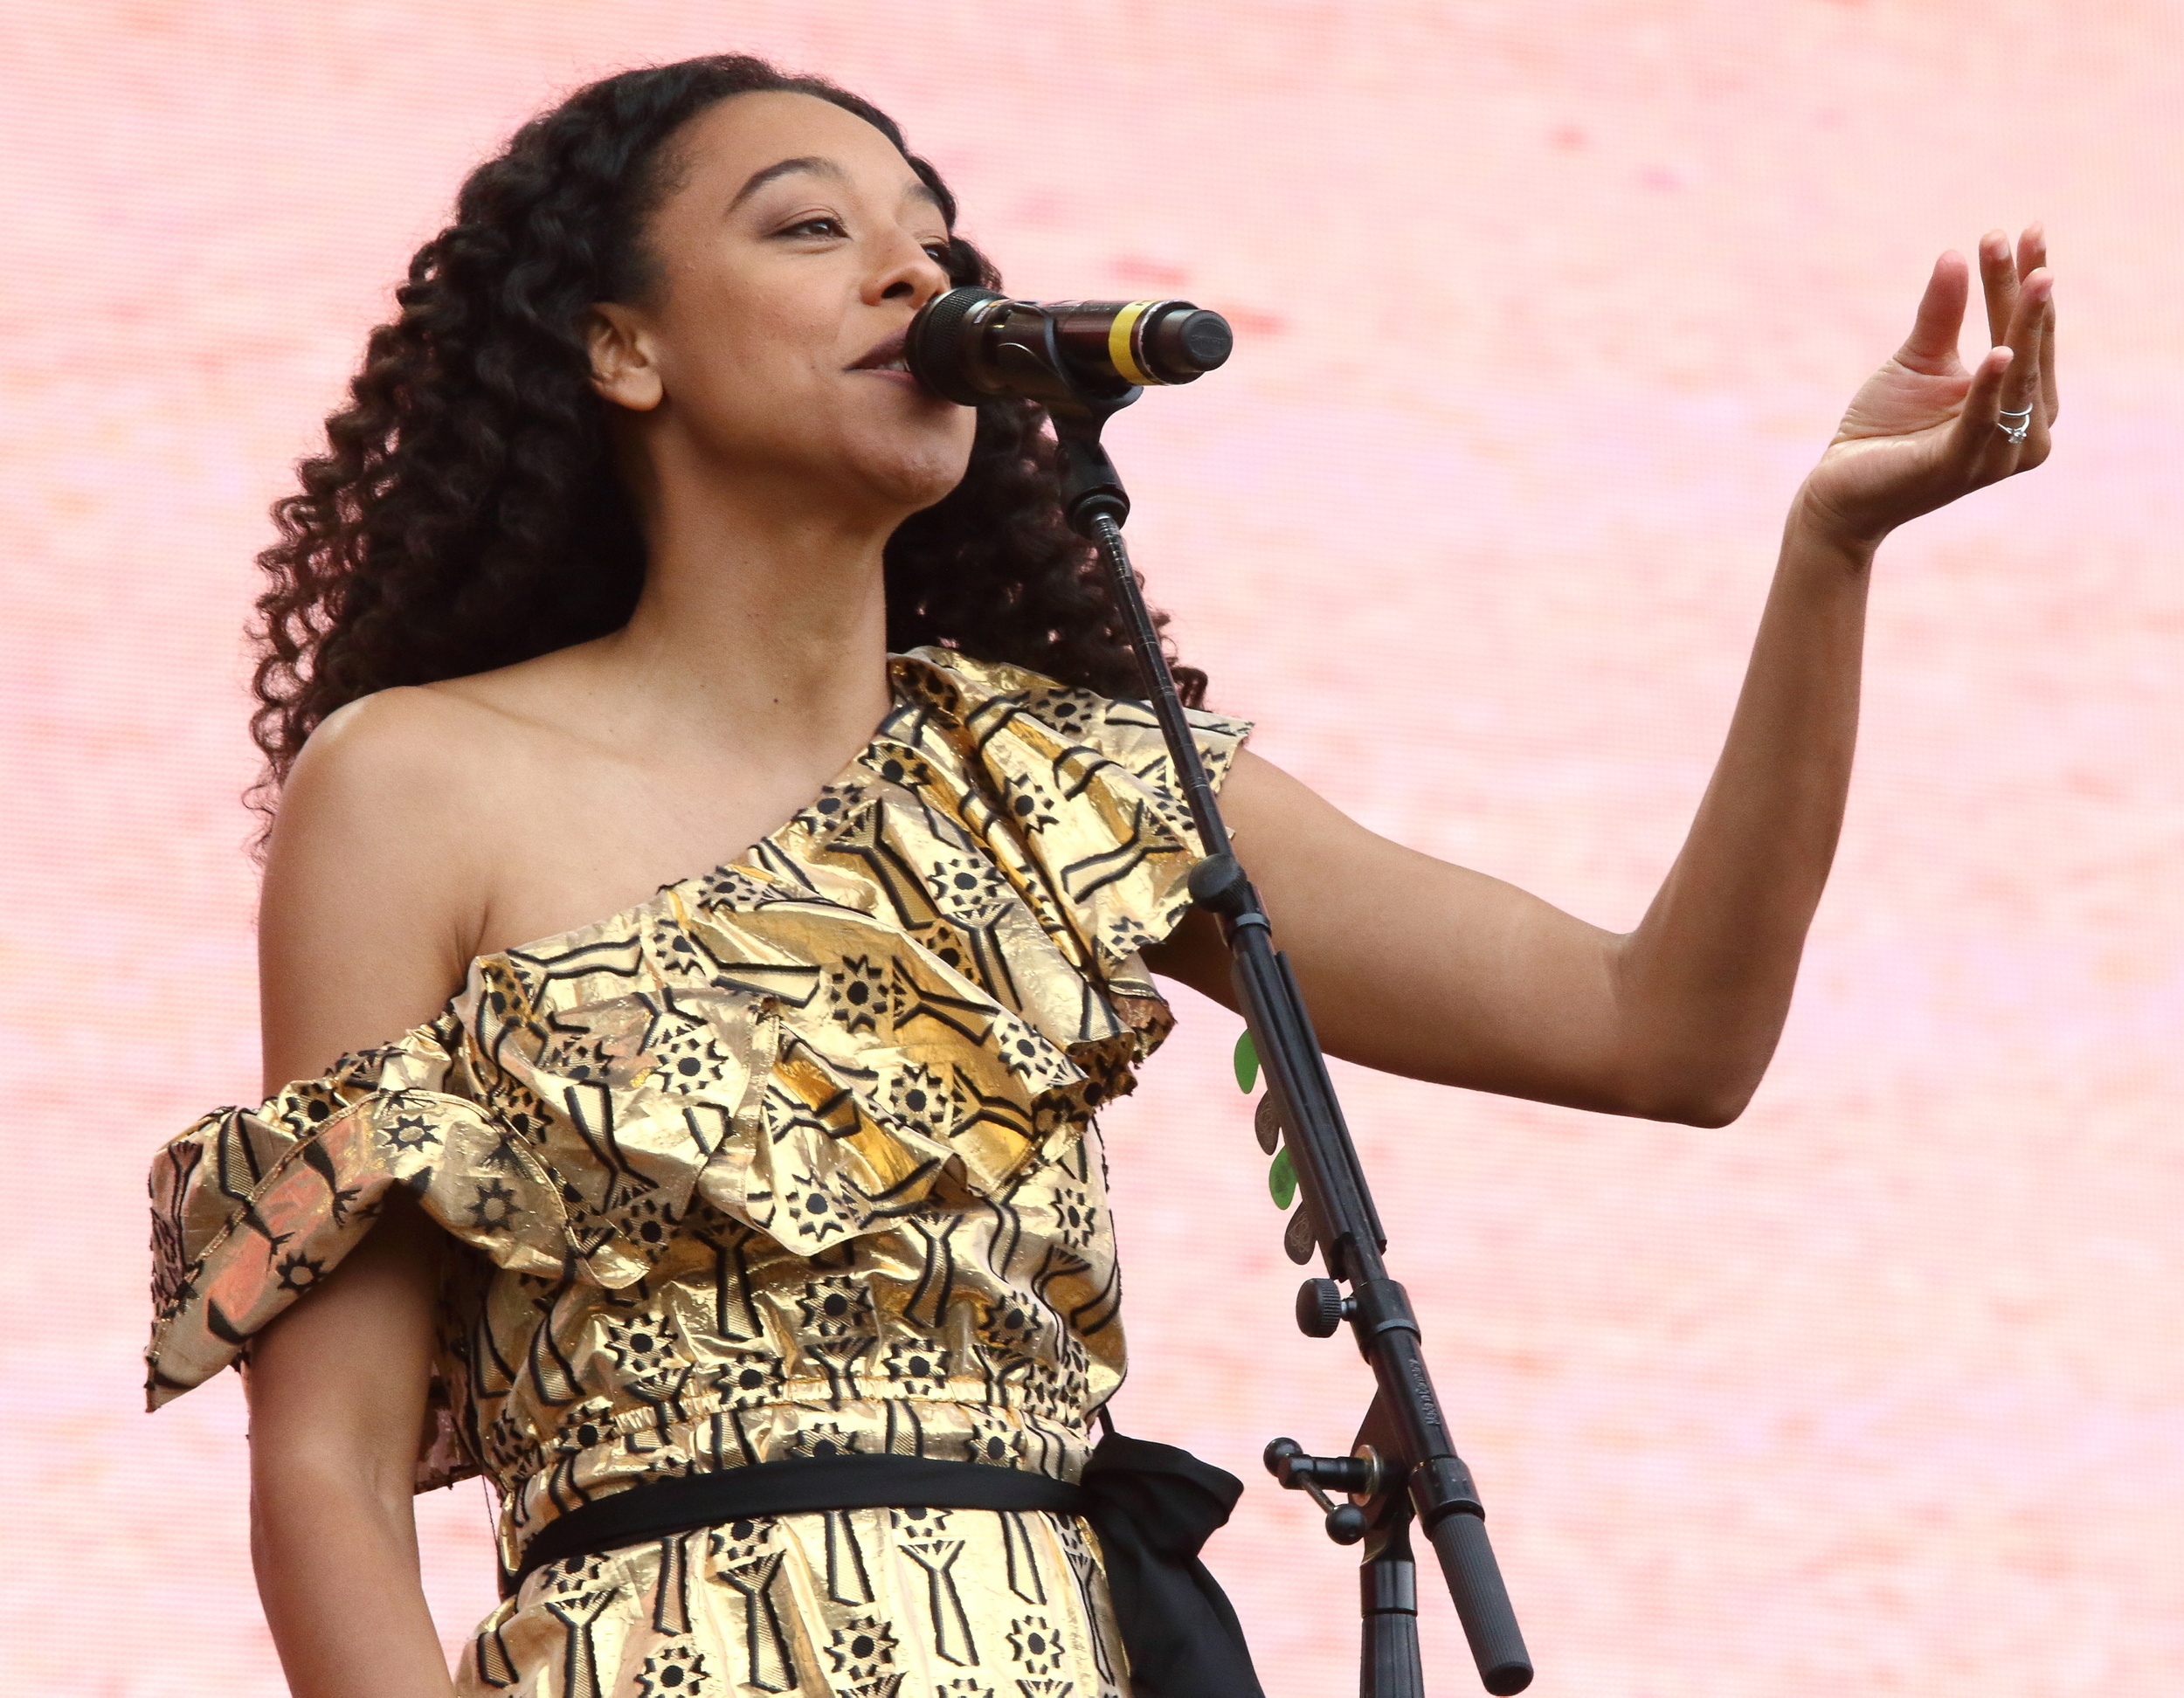 <p>Corinne Bailey Rae's "Put Your Records On" is one of the few songs out there that makes us feel completely safe. Something about it fills us with hope, and to be honest, we could all use more of that these days.</p><p><a href='https://www.msn.com/en-us/community/channel/vid-cj9pqbr0vn9in2b6ddcd8sfgpfq6x6utp44fssrv6mc2gtybw0us'>Follow us on MSN to see more of our exclusive entertainment content.</a></p>